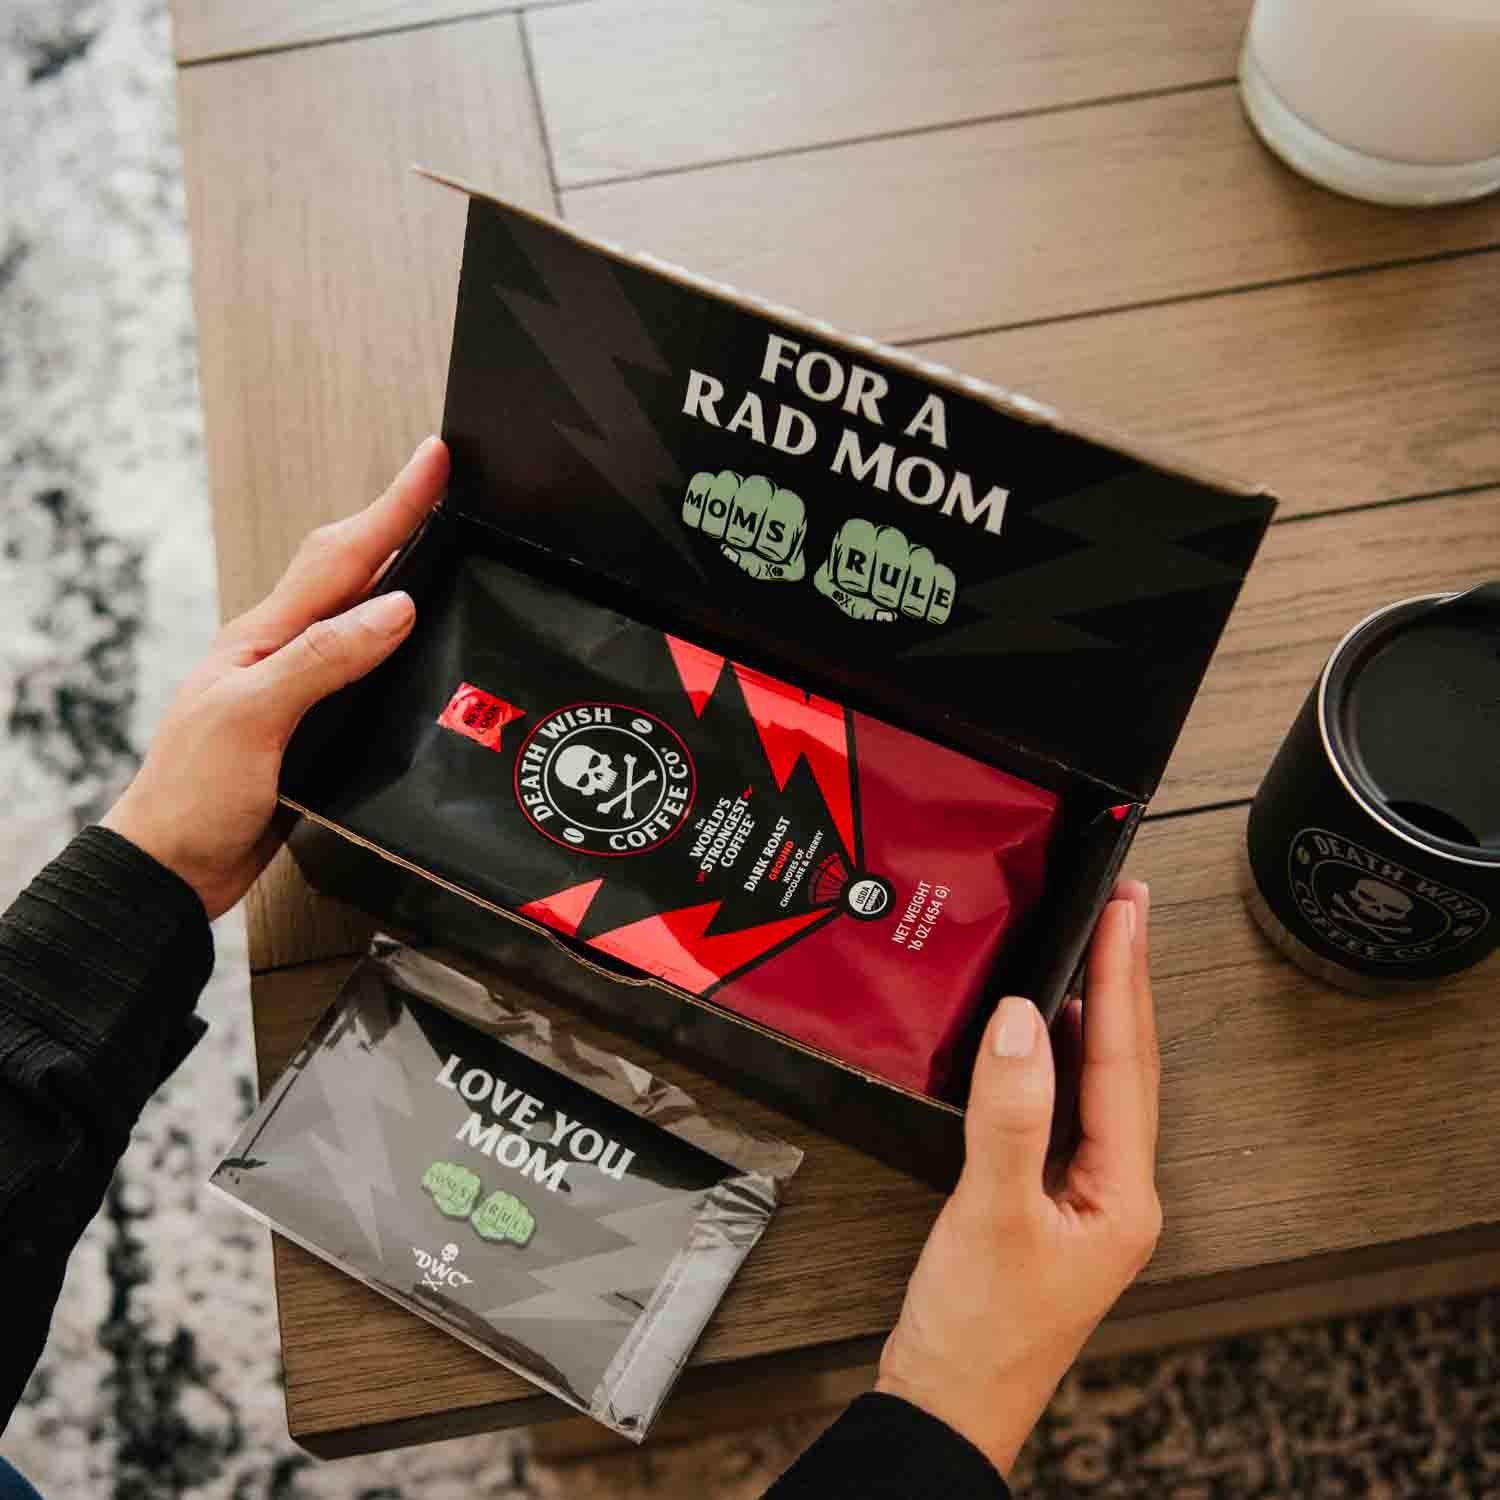 Unboxing the Death Wish Coffee Rad Mom Kit.